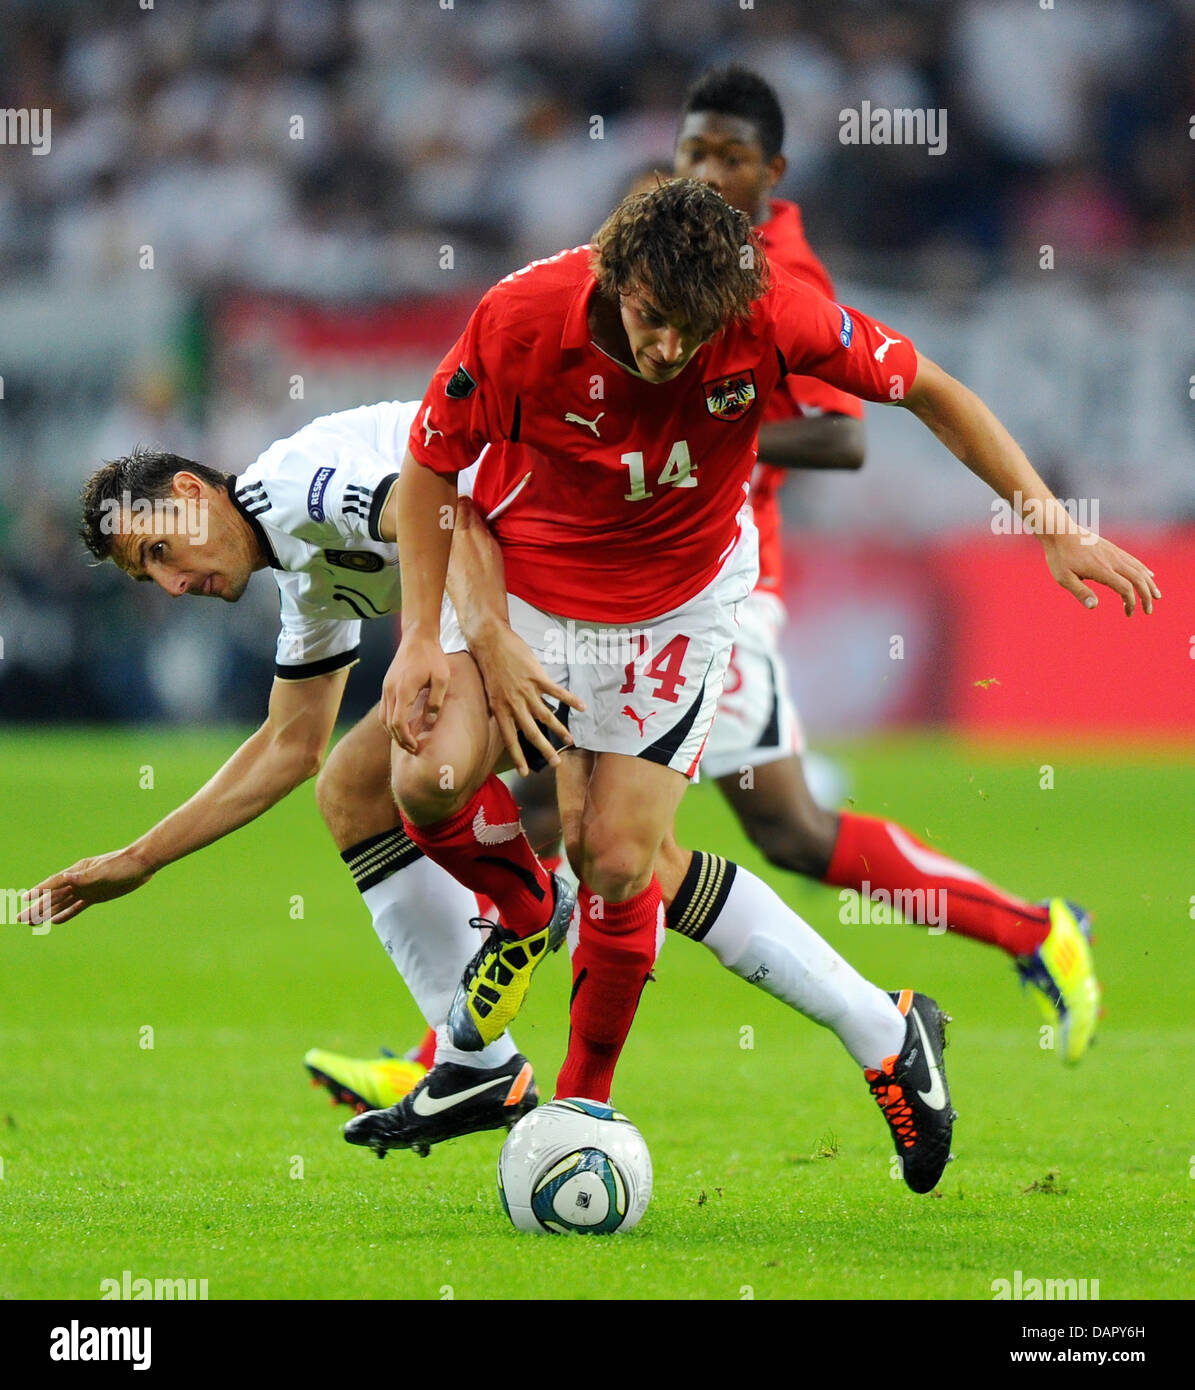 Germany's Miroslav Klose (BACK) vies for the ball with Austria's Julian Baumgartlinger  during the EURO 2012 group A qualifier match Germany vs Austria at Arena Auf Schalke in Gelsenkirchen, Germany, 02 September 2011. Photo: Thomas Eisenhuth Stock Photo